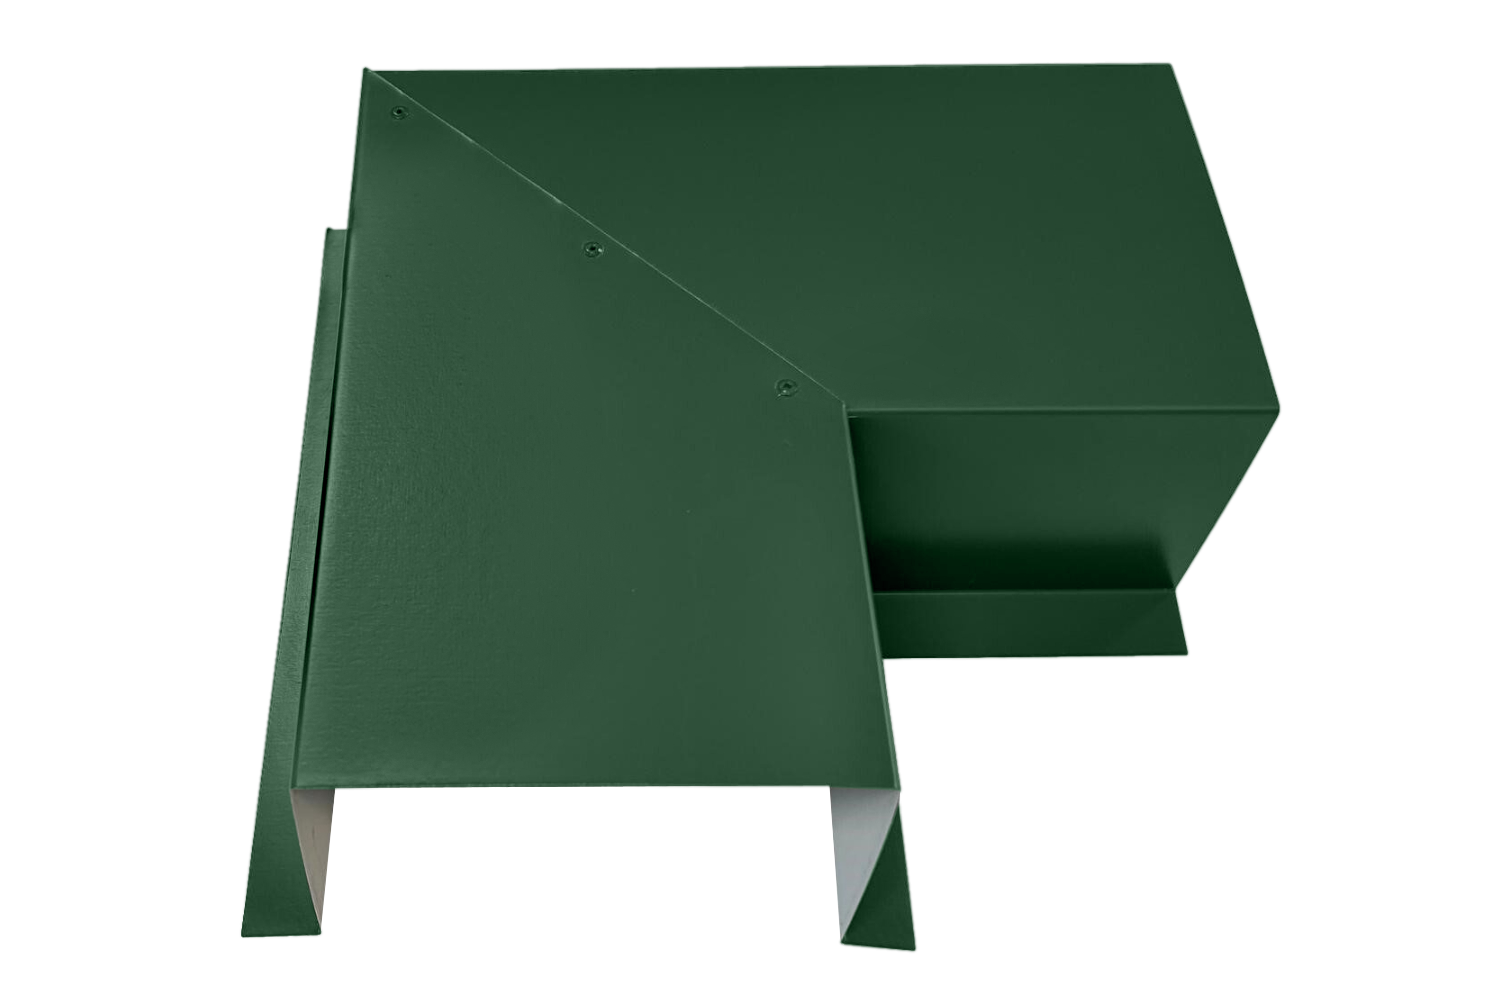 An angular, green metal object with multiple flat surfaces, an overhanging section, and a protruding narrow platform. Crafted from premium quality 24 gauge steel with sharp edges and small fasteners, its design suggests easy installation as a component in construction or machinery. This meticulously crafted piece is the Commercial Series - 24 Gauge Line Set Cover Side Turning Elbows - Premium Quality by Perma Cover.